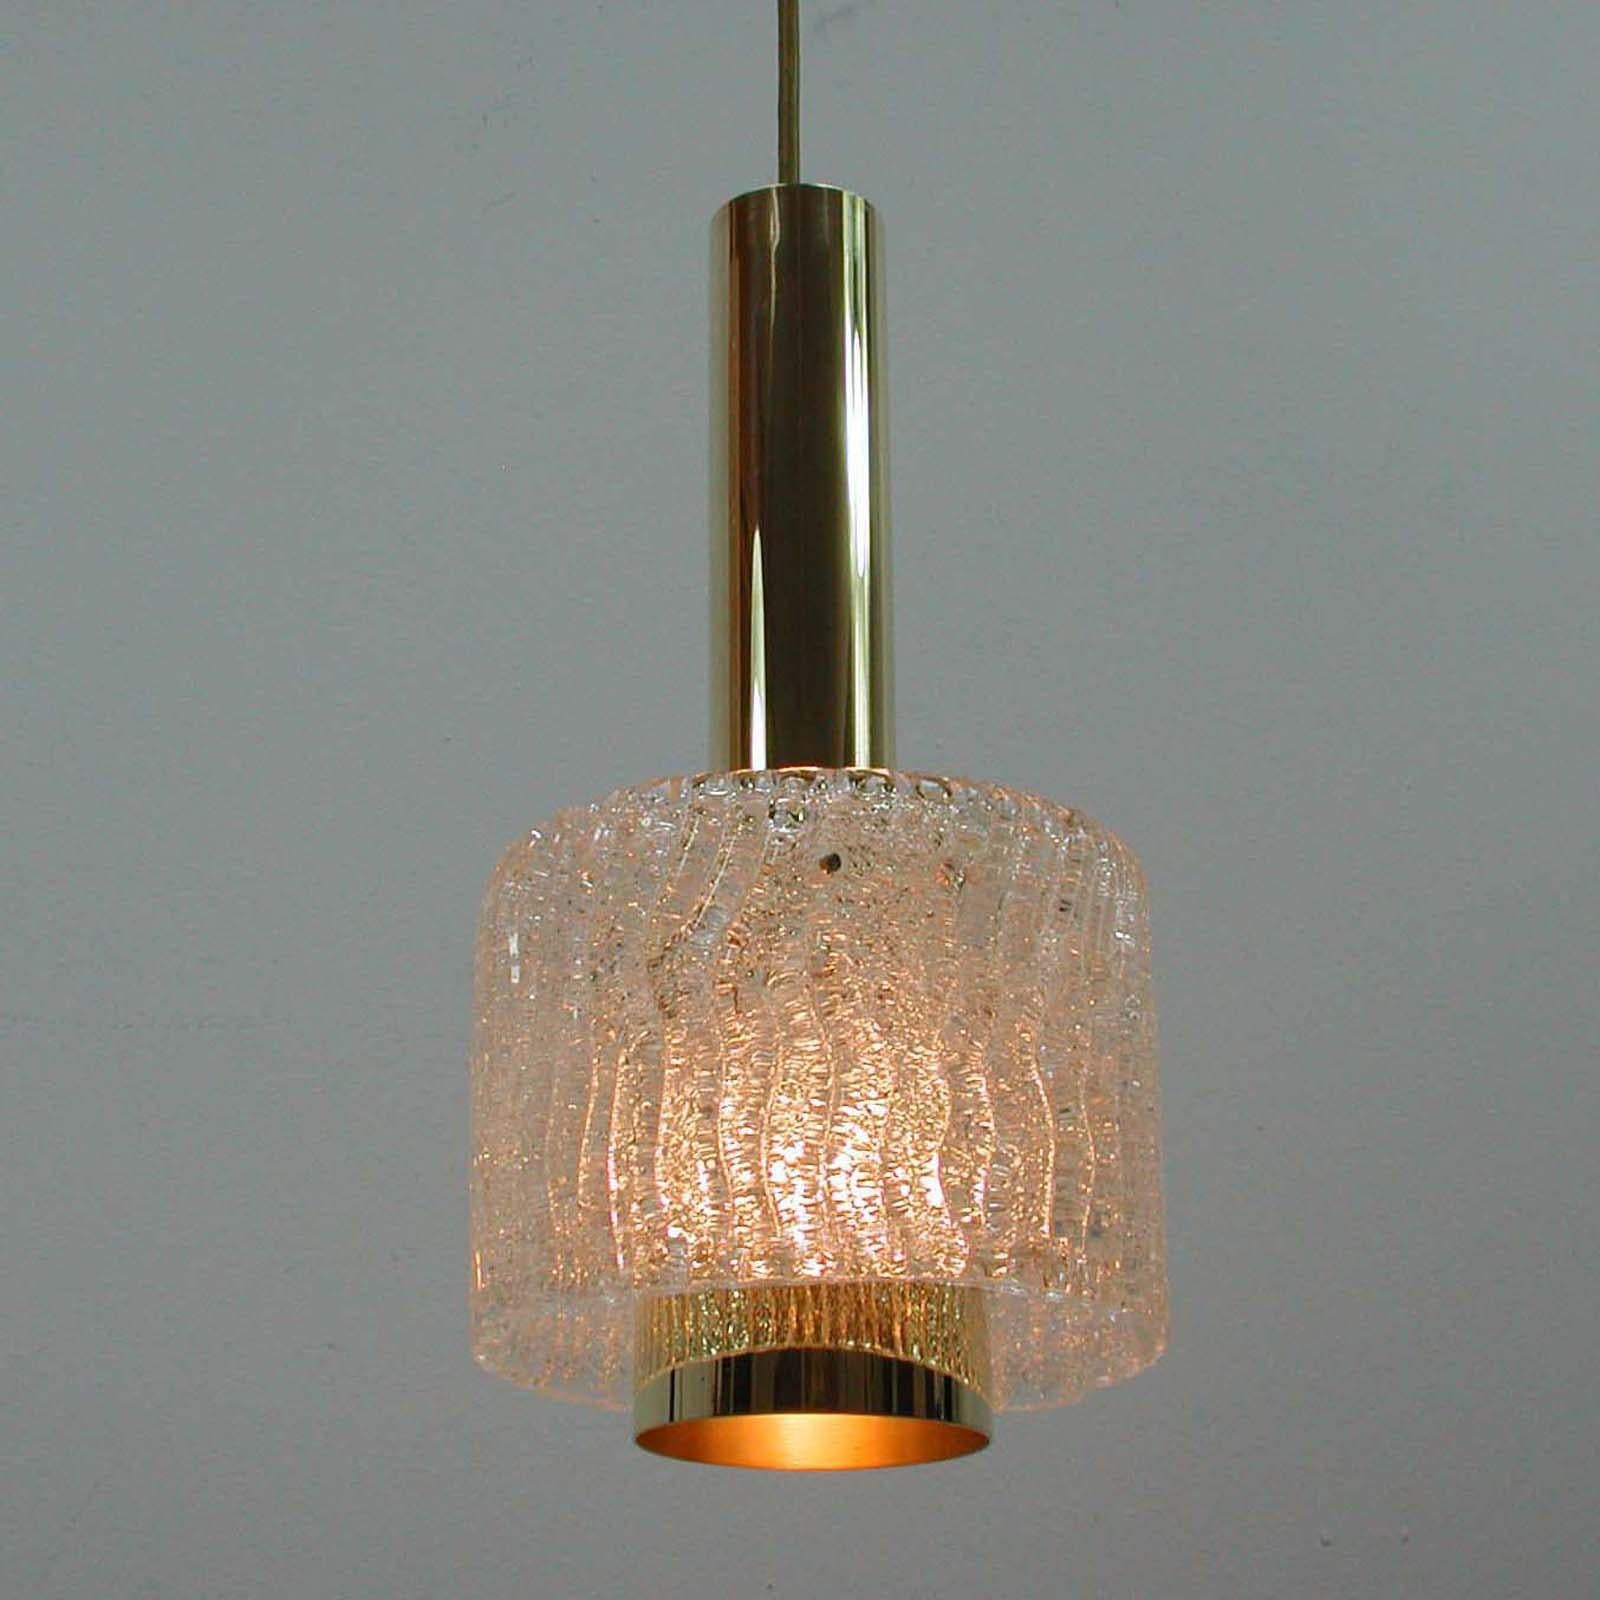 J.T. Kalmar Midcentury Textured Glass and Brass Pendant, 1950s For Sale 2